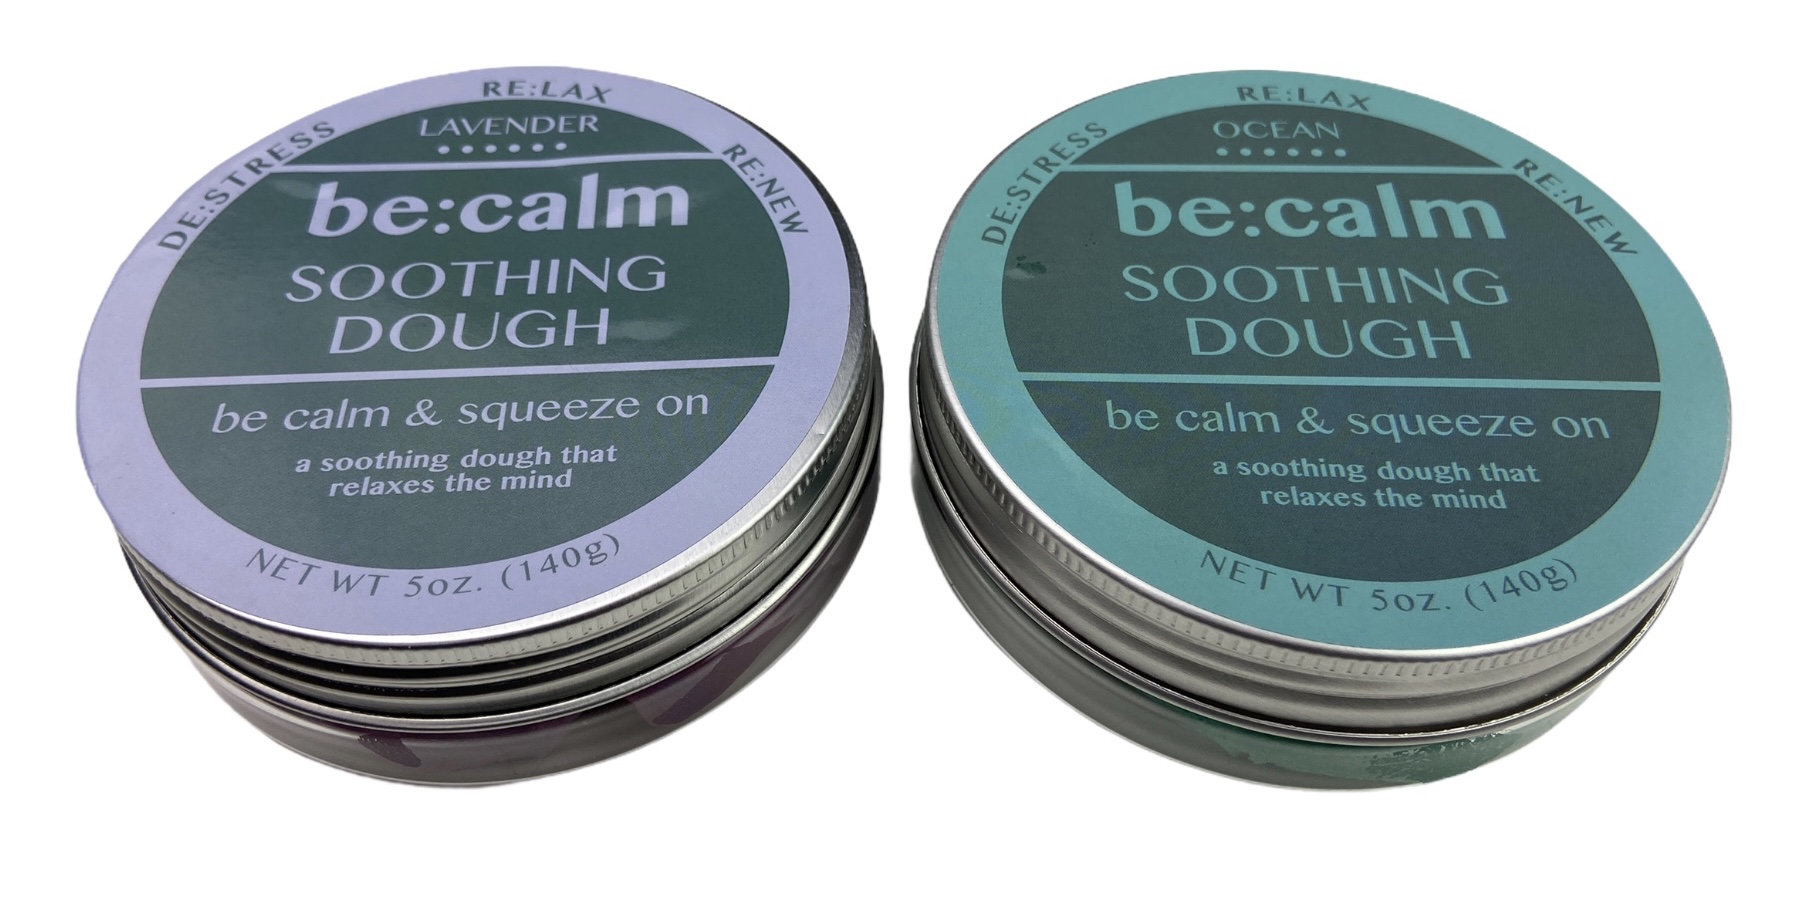 2 Pack of Be Calm Therapy Doug...